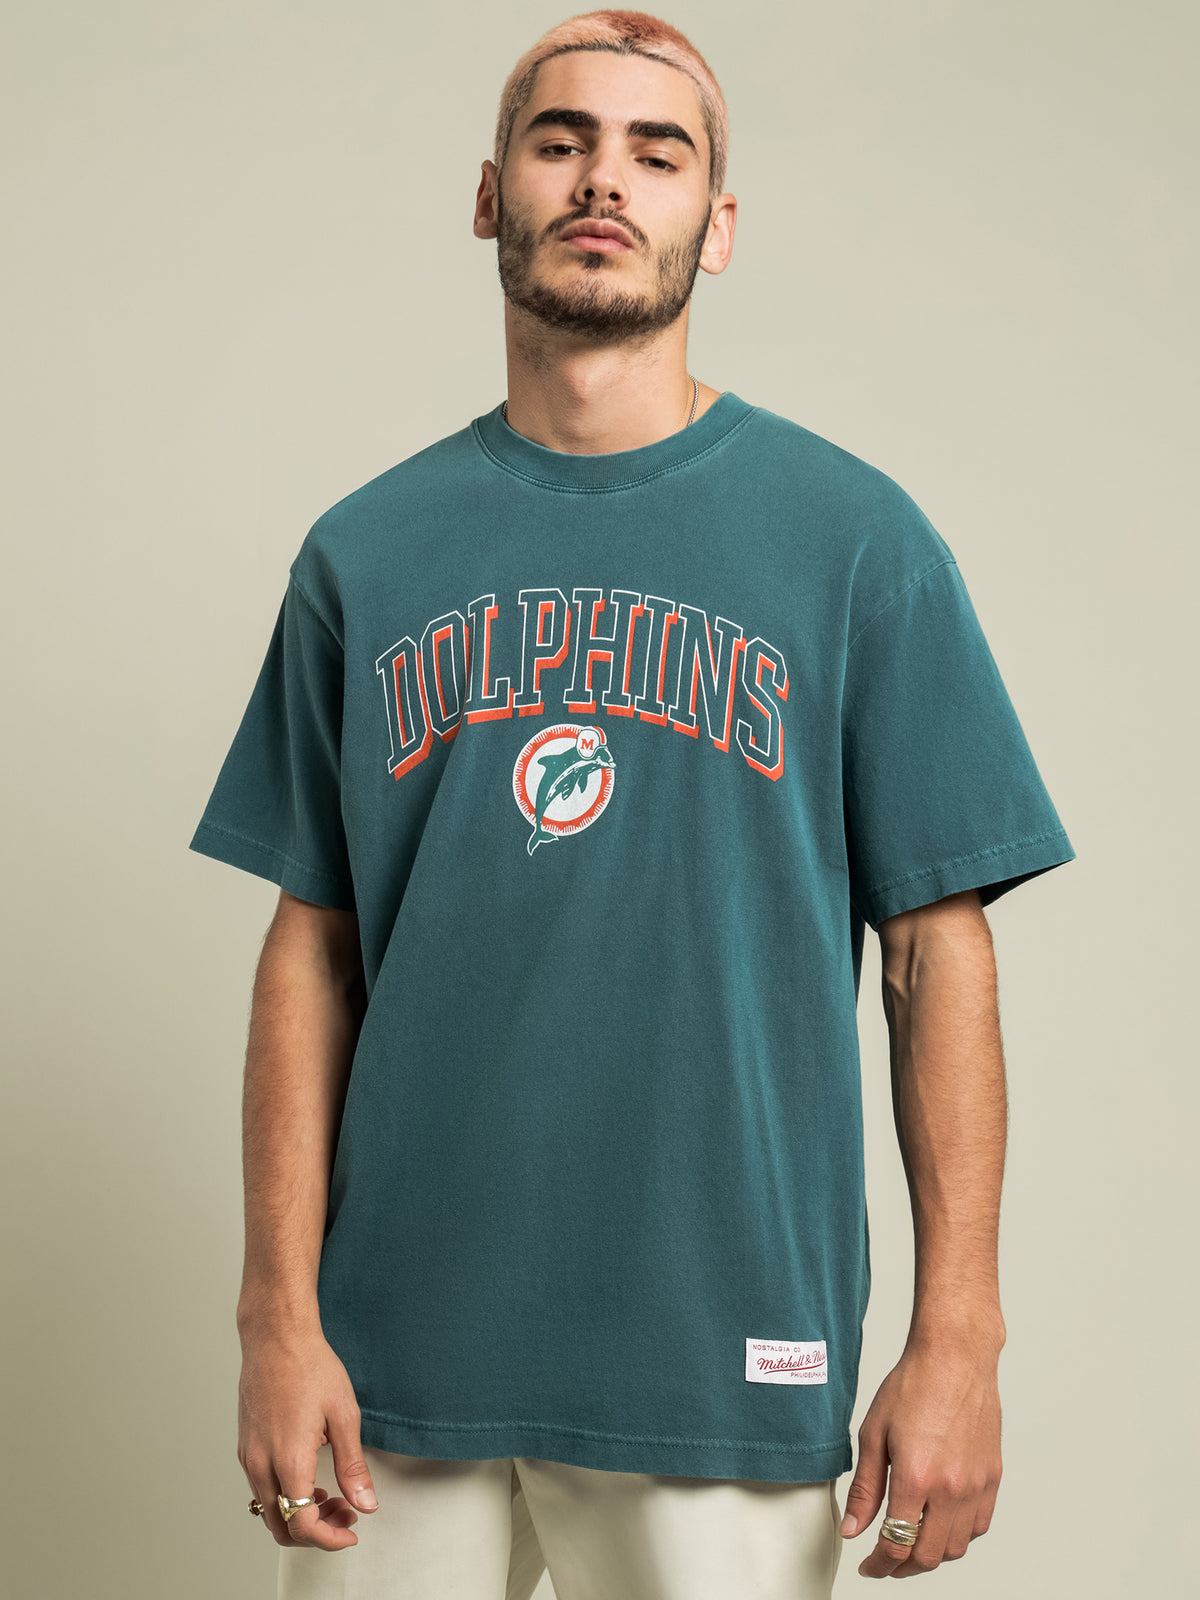 Miami Dolphins NFL T-Shirt in Vintage Teal